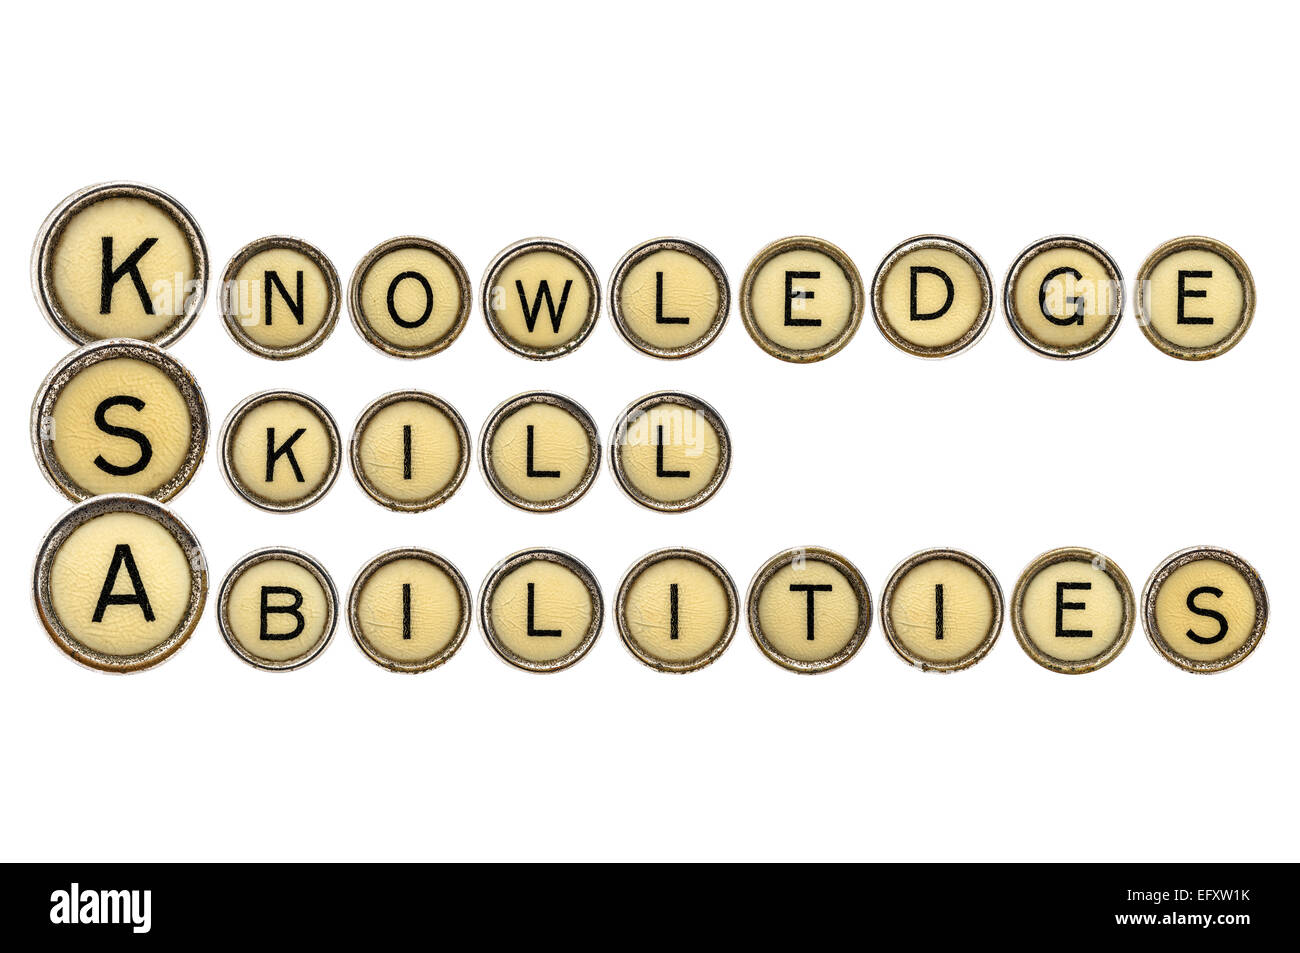 Knowledge, skills, and abilities (KSA) is a concise essay about one's talent and expertise and related experiences. A word abstr Stock Photo